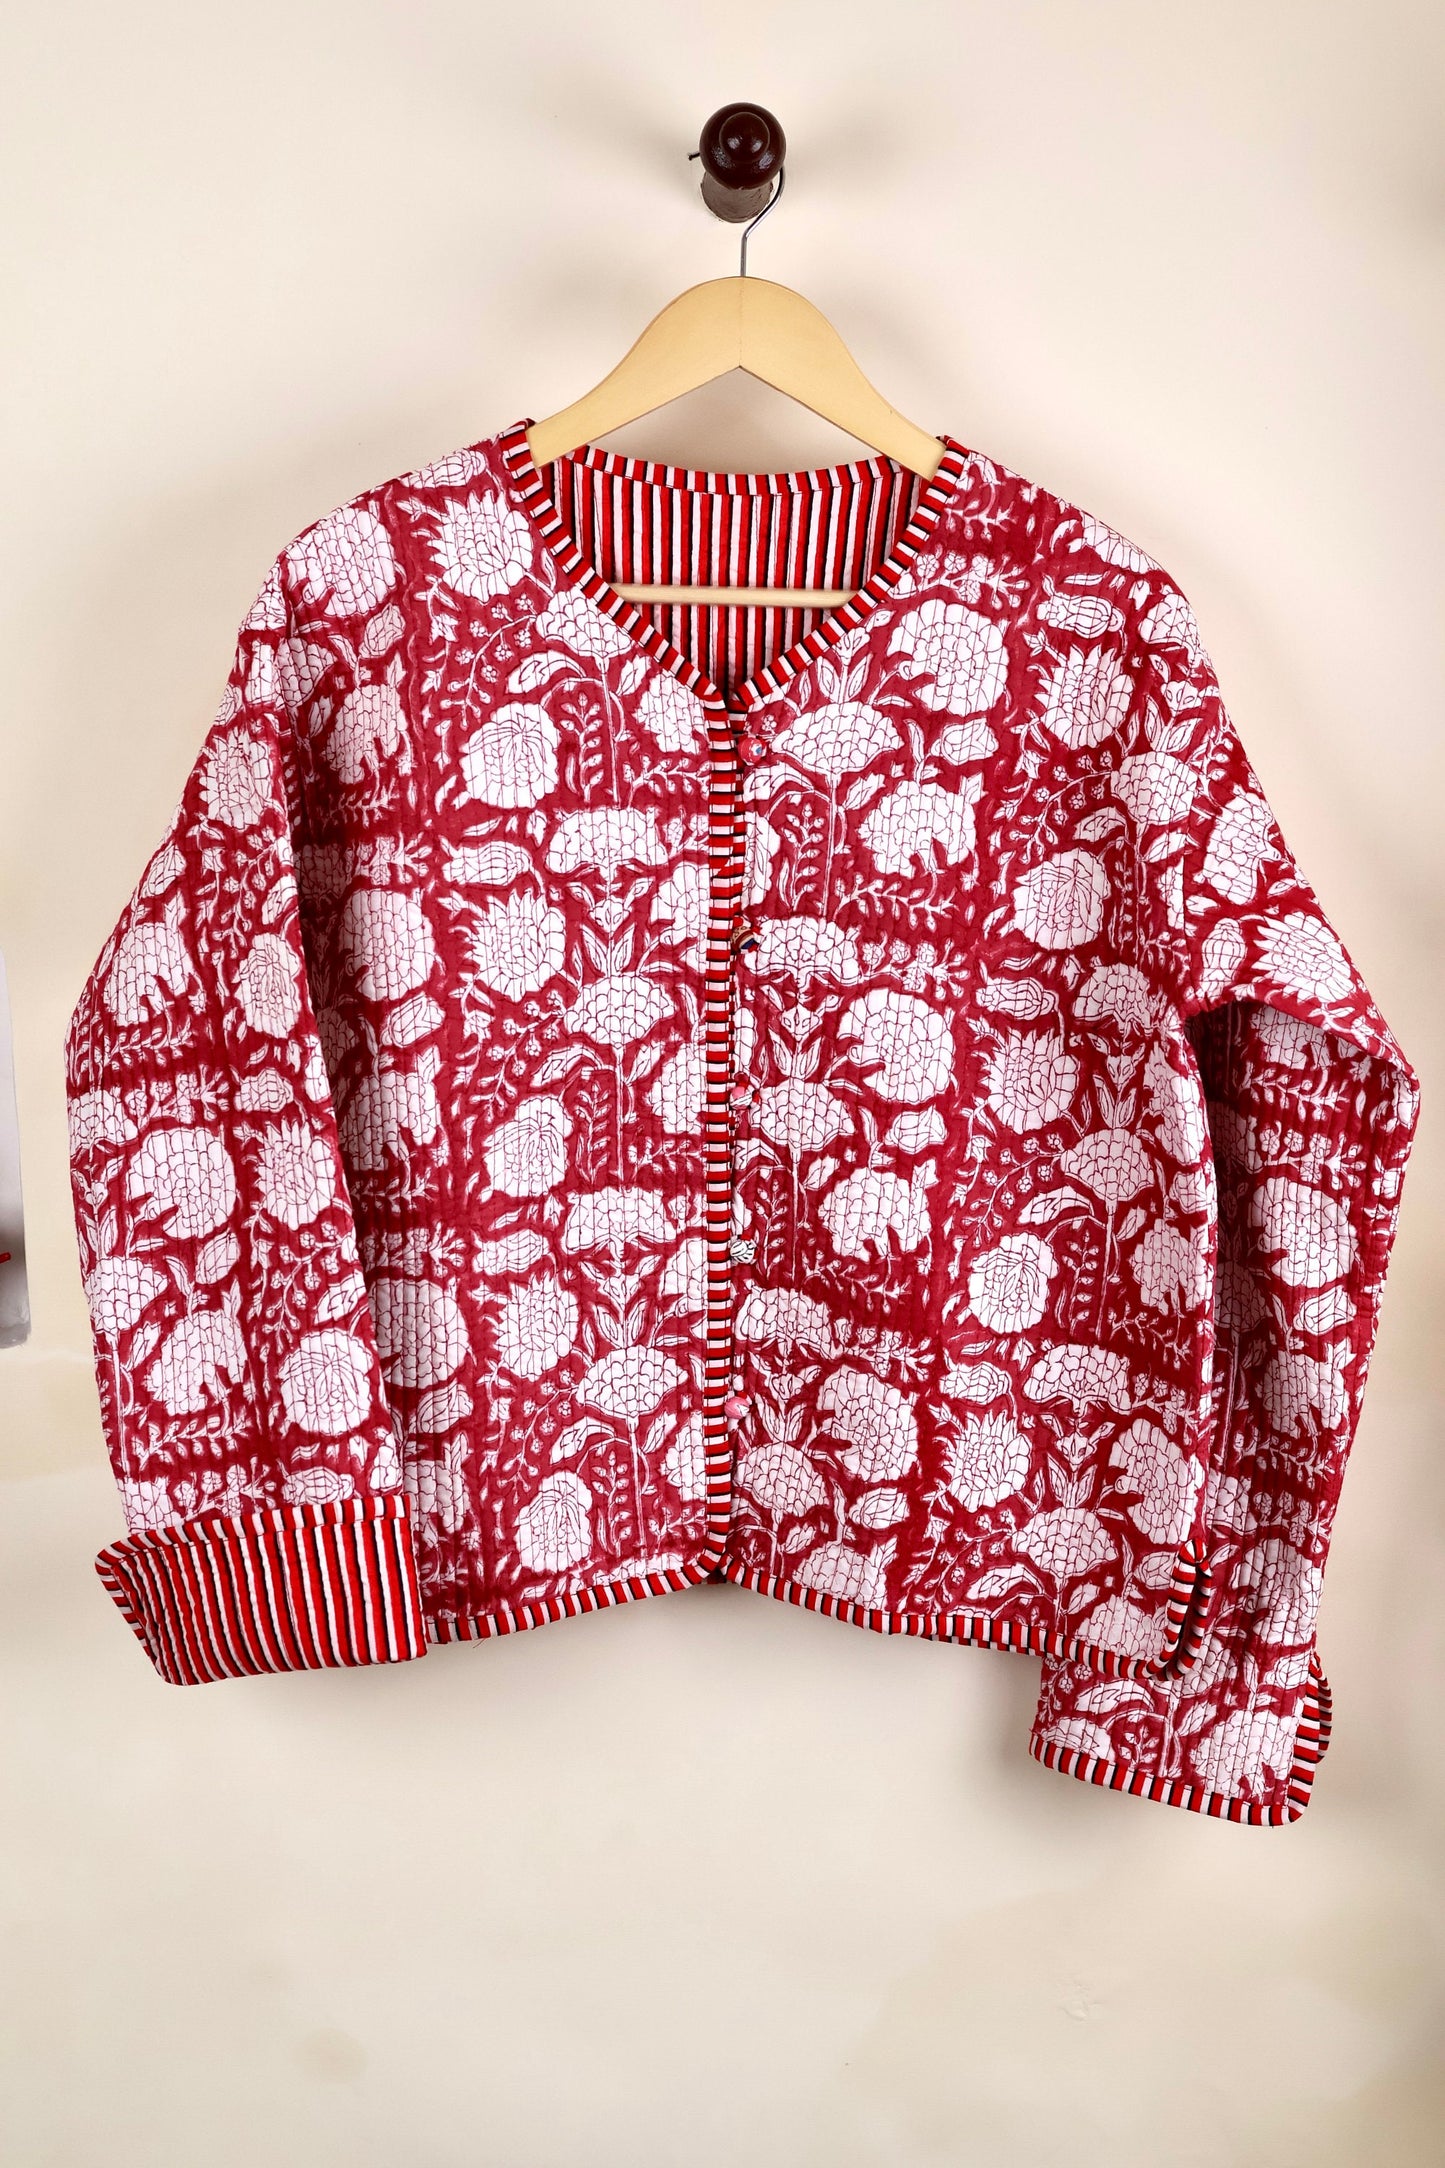 HandBlock Printed Quilted Cotton Jackets | White & Red Floral Women's Coat | Reversible Bohemian Style Indian Handmade Quilted Jackets